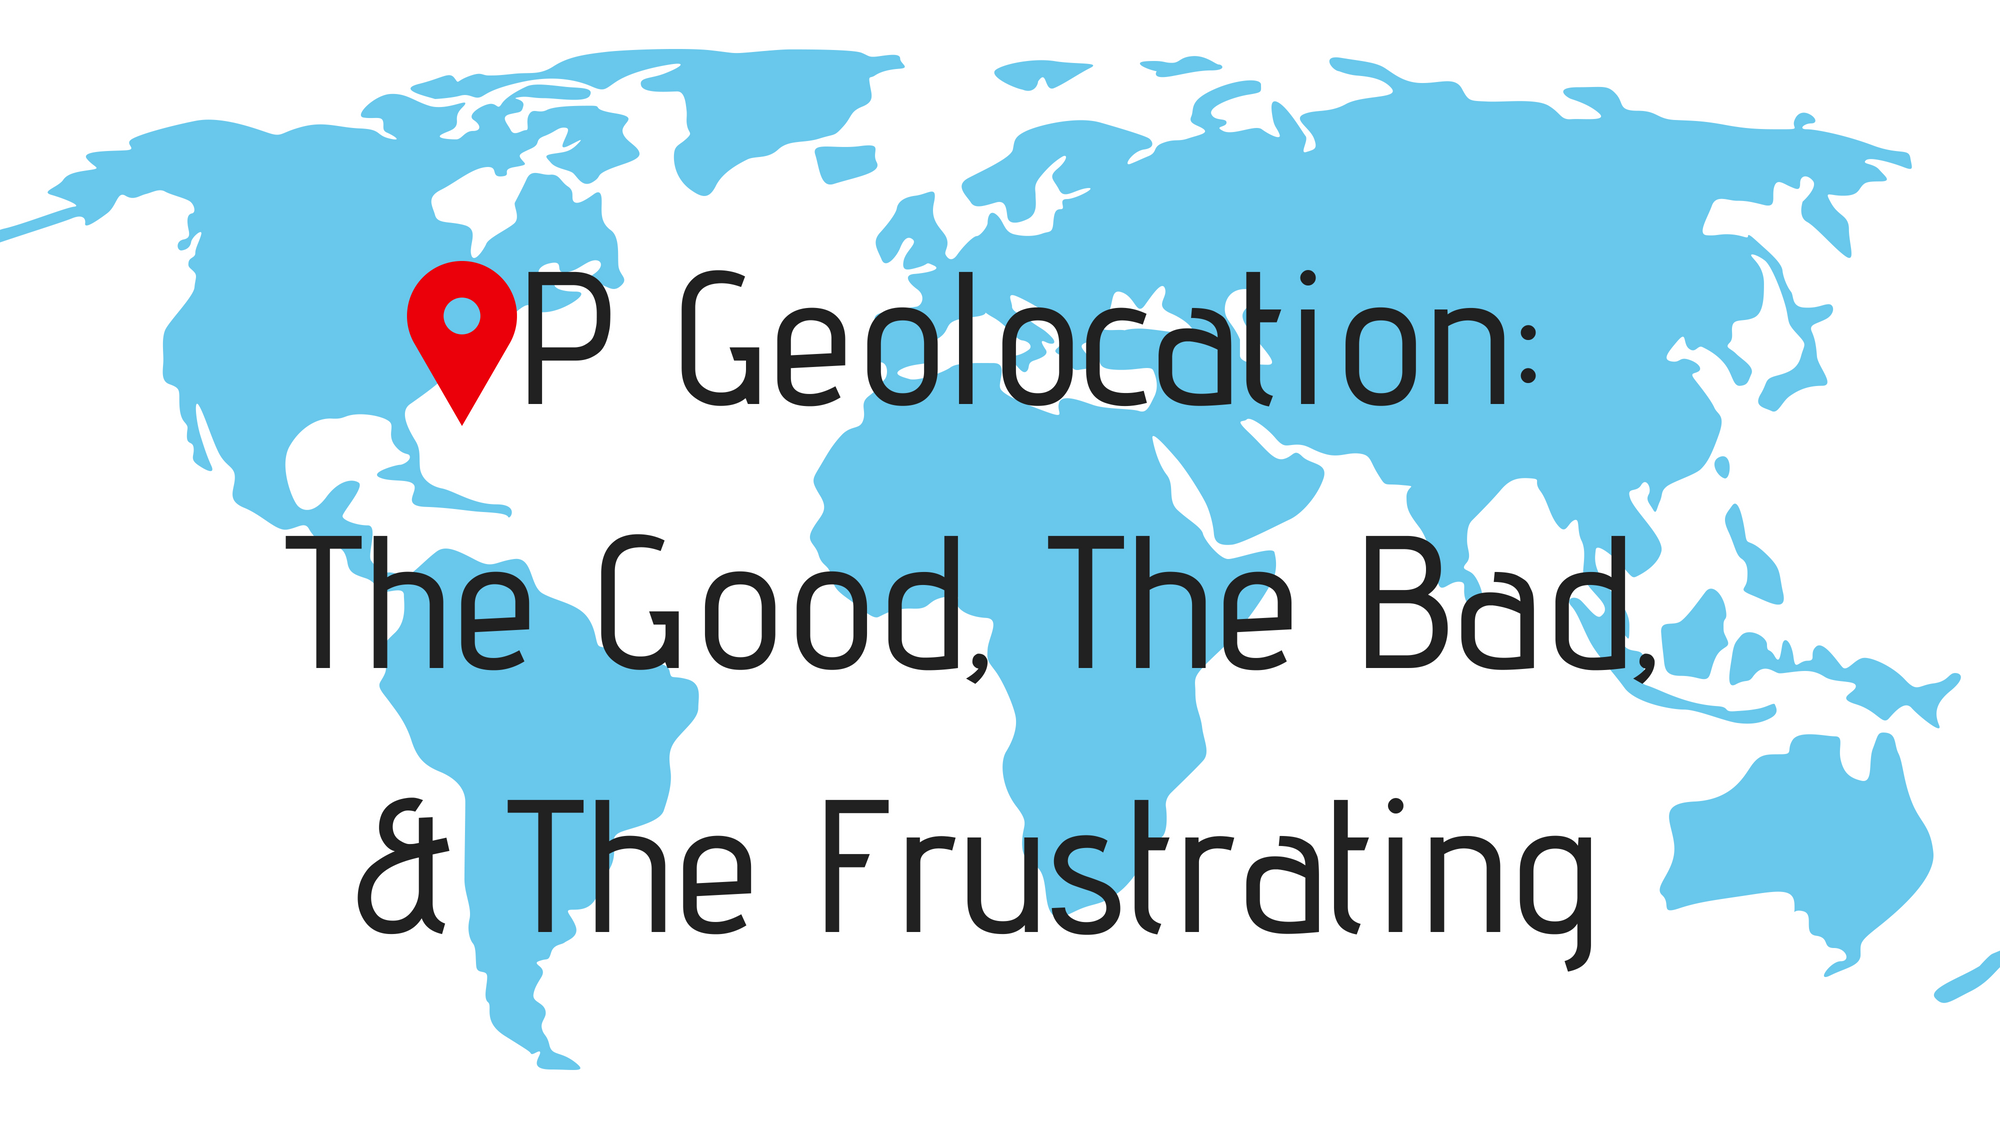 IP Geolocation: The Good, The Bad, & The Frustrating